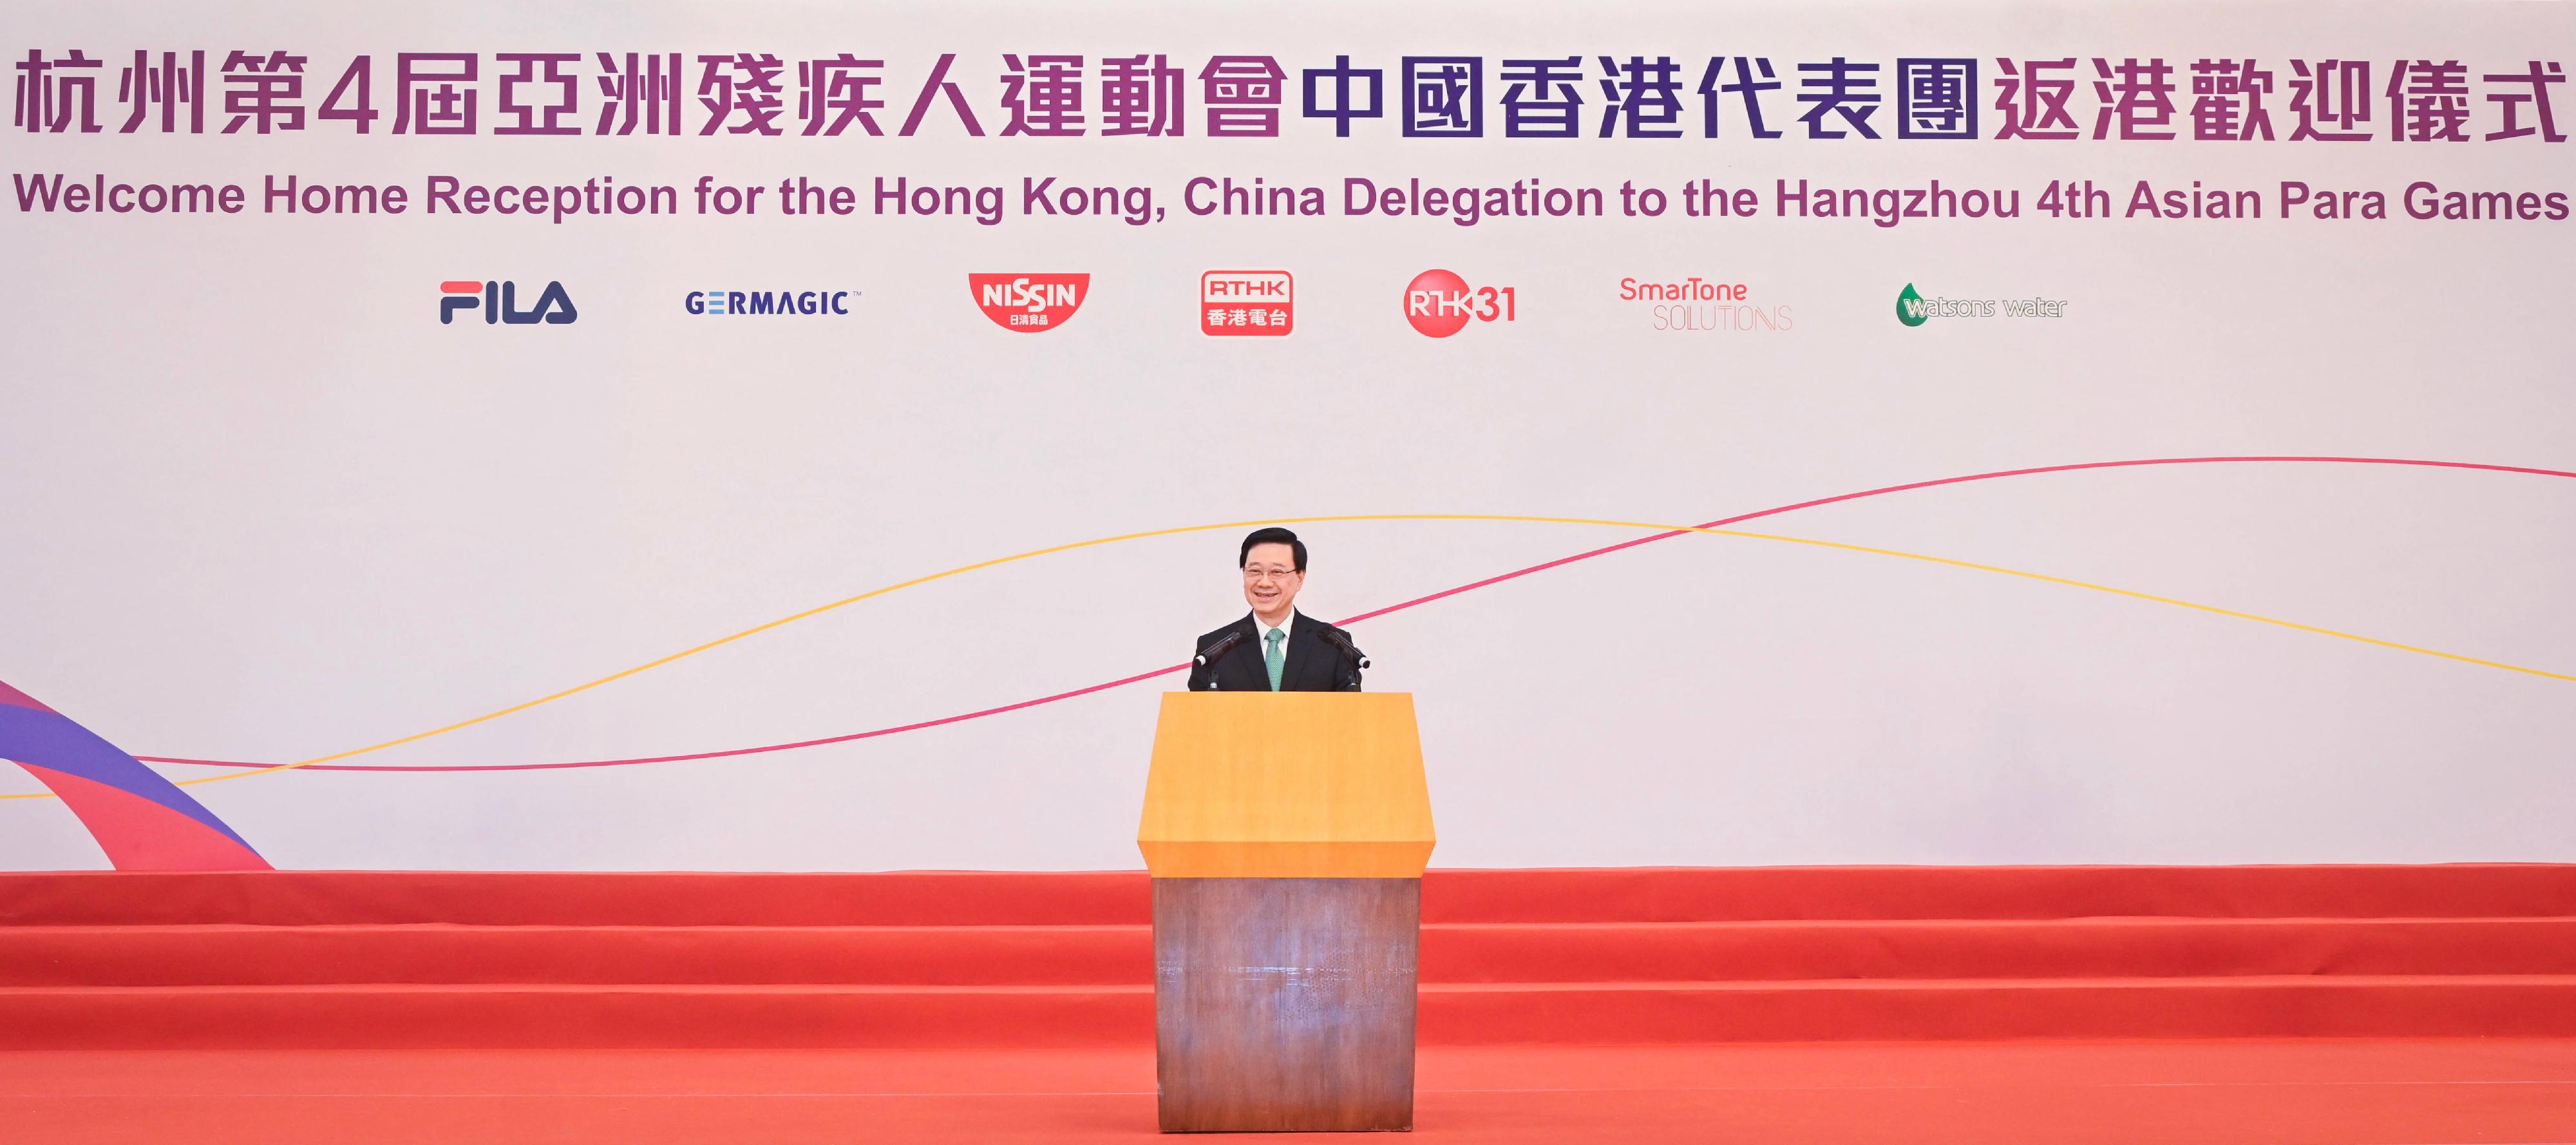 The Chief Executive, Mr John Lee, speaks at the welcome home reception for the Hong Kong, China Delegation from the 4th Asian Para Games Hangzhou today (November 13).